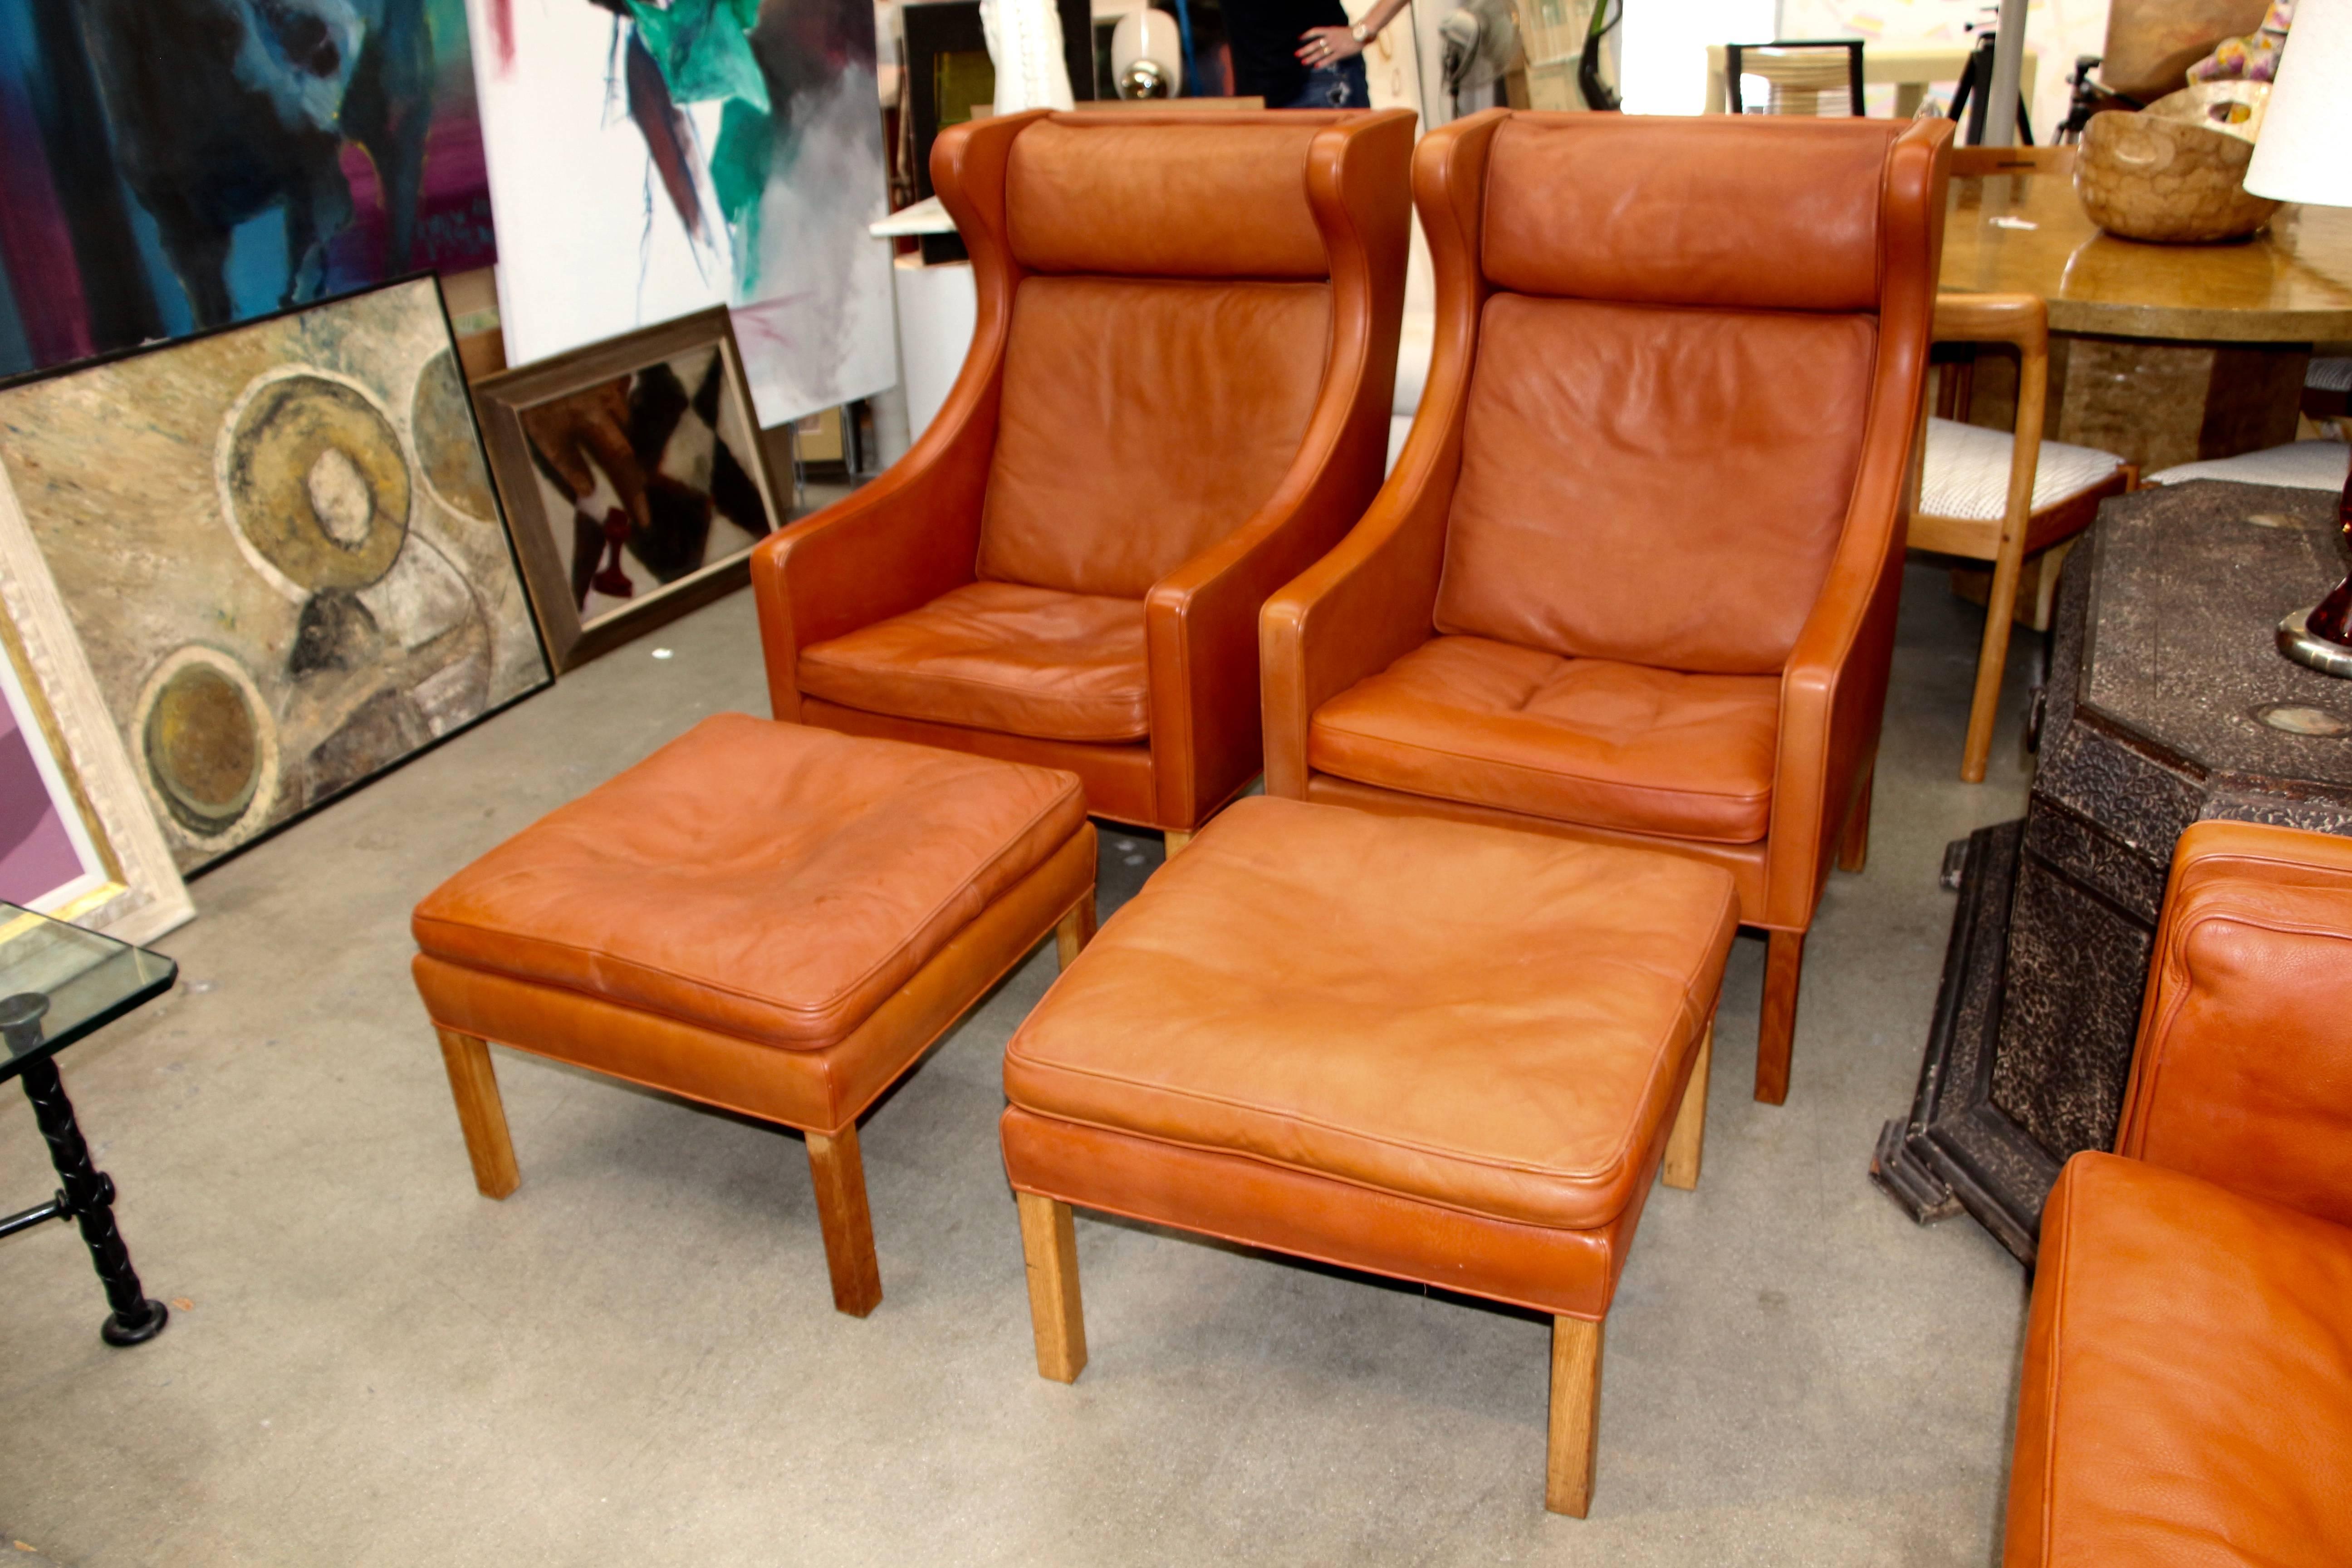 A pair of vintage leather wingback chairs designed in 1963 by Børge Mogensen for Fredericia Furniture of Denmark. Based on the labels on the ottomans and chairs, we date these to the 1960s and this was verified by the estate we purchased these from.